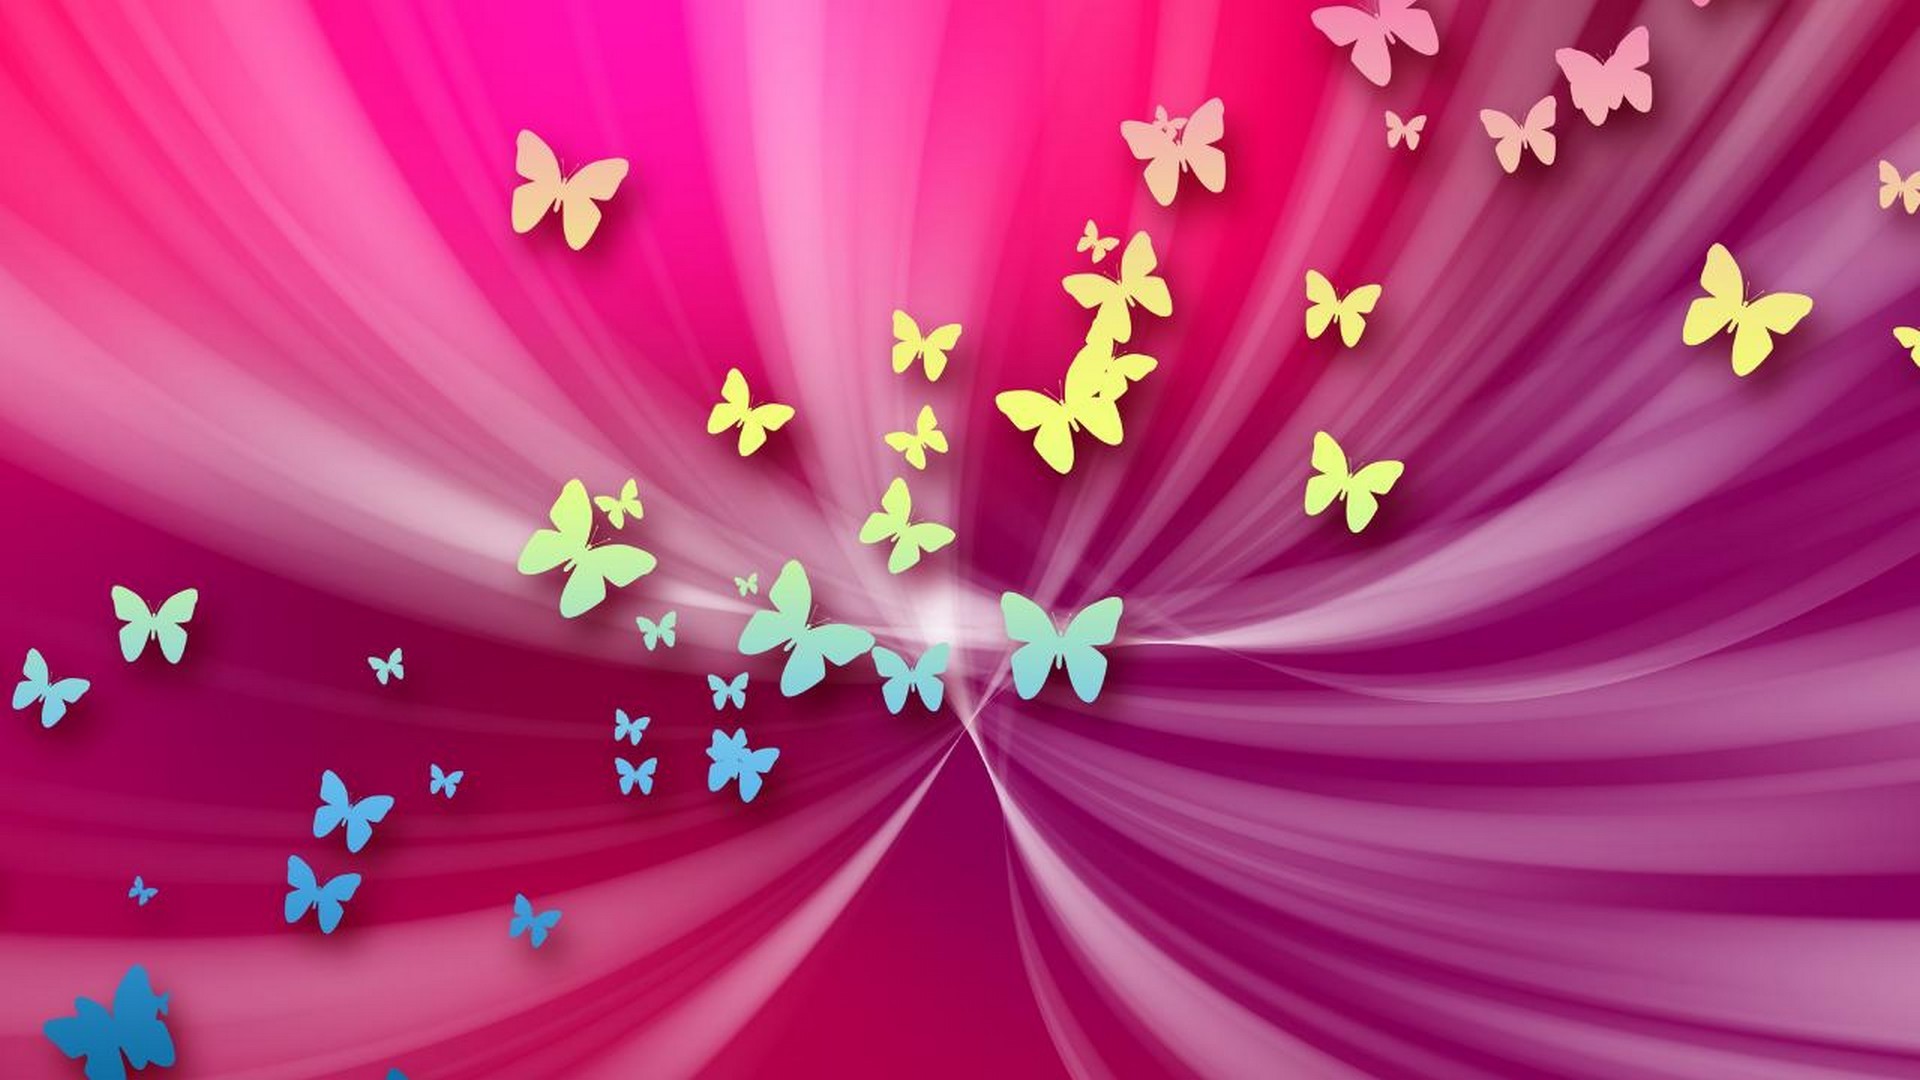 HD Pink Butterfly Backgrounds 1920x1080